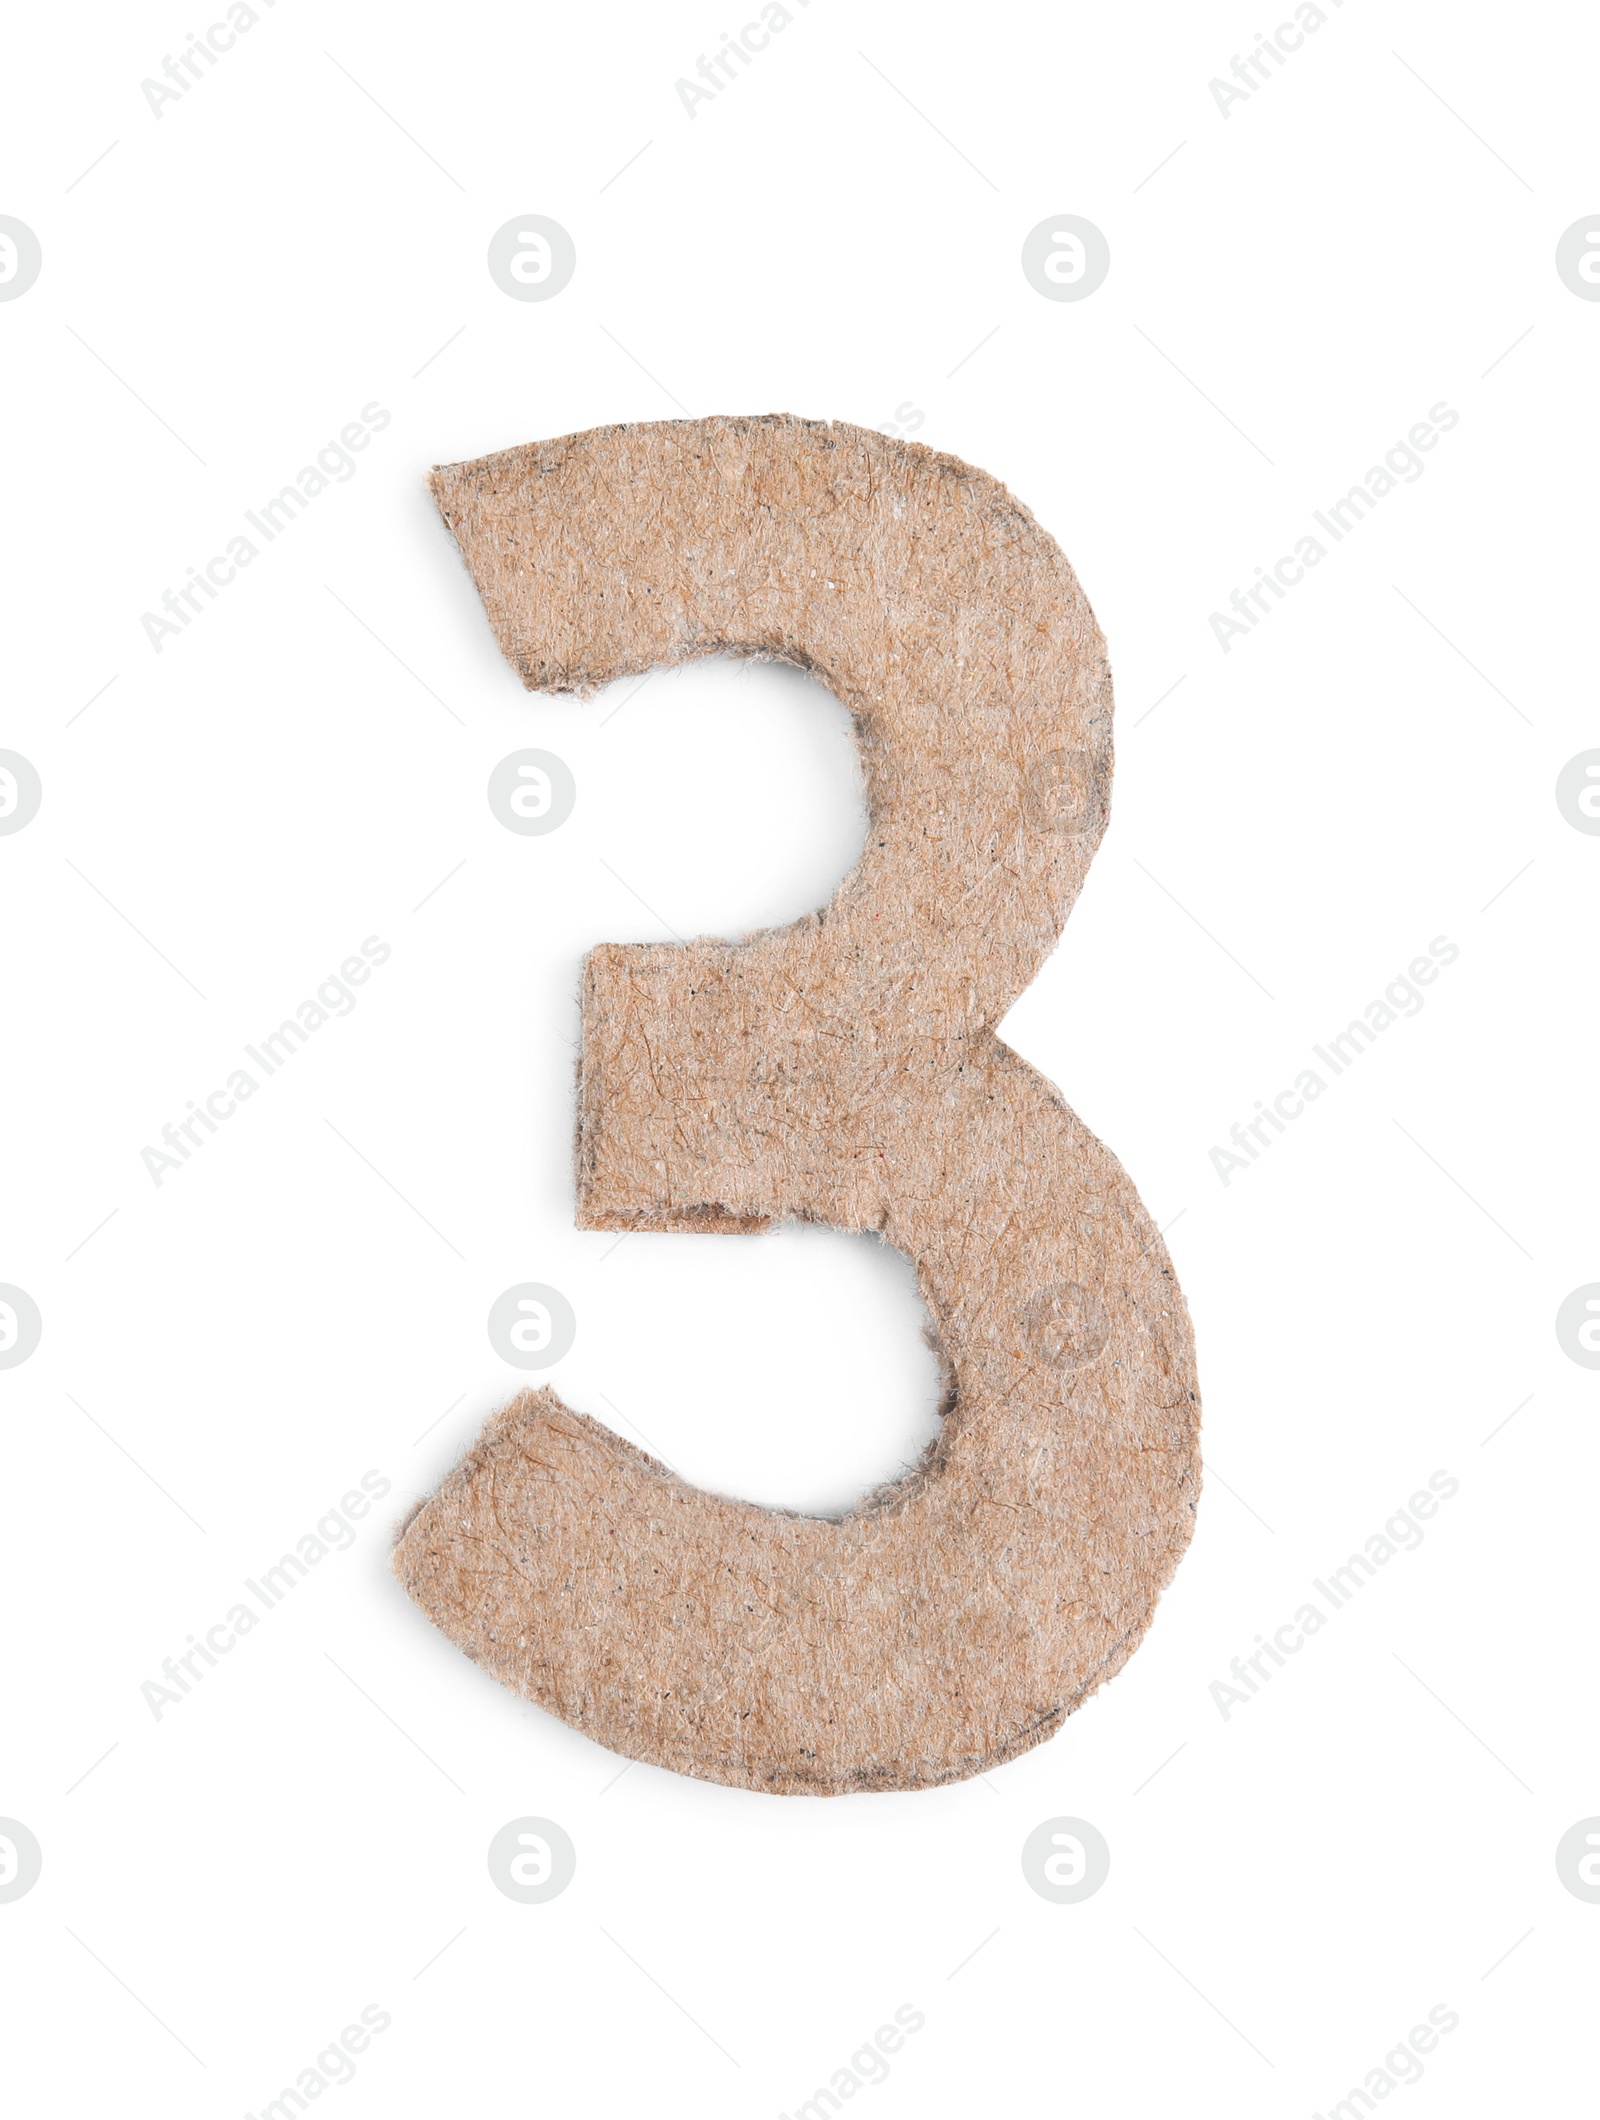 Photo of Number 3 made of cardboard isolated on white